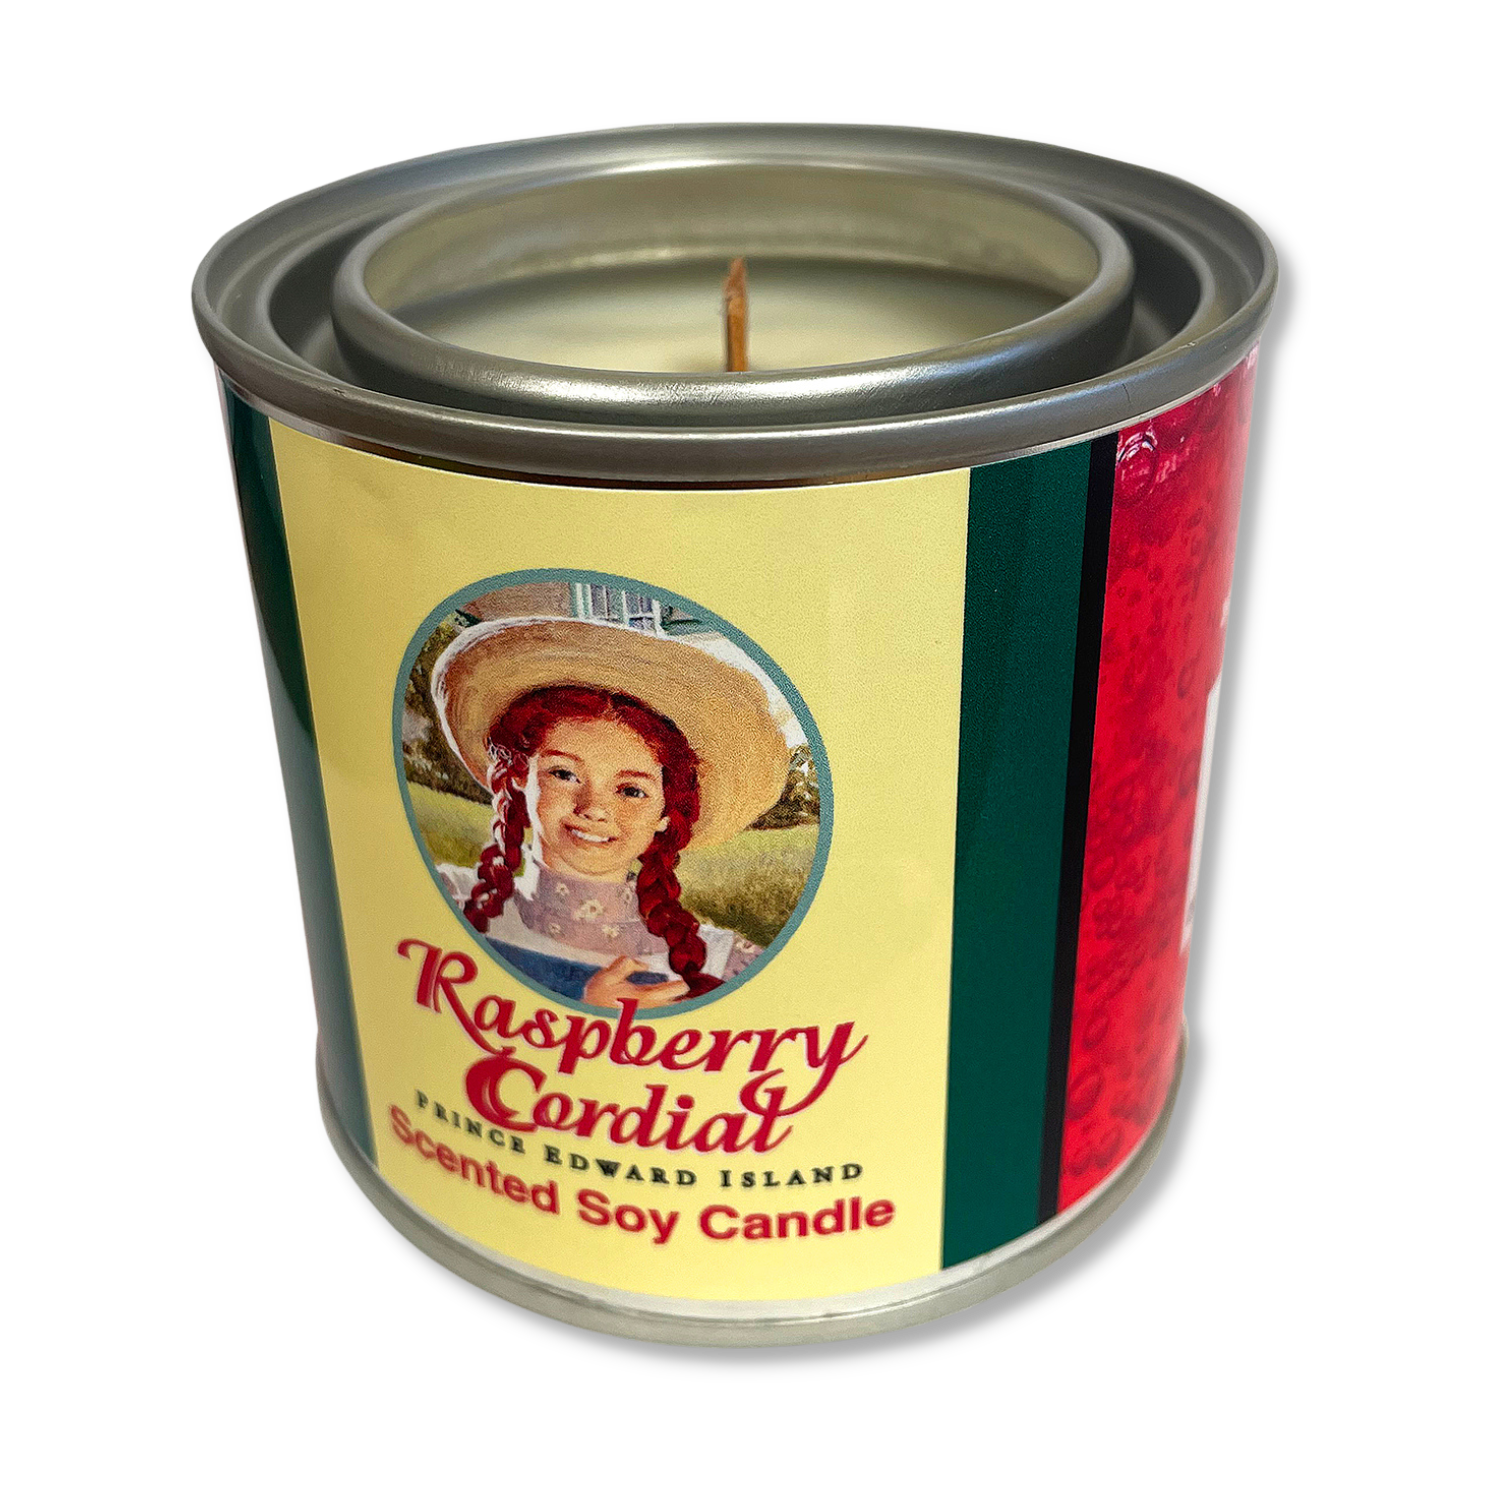 Raspberry Cordial Candle